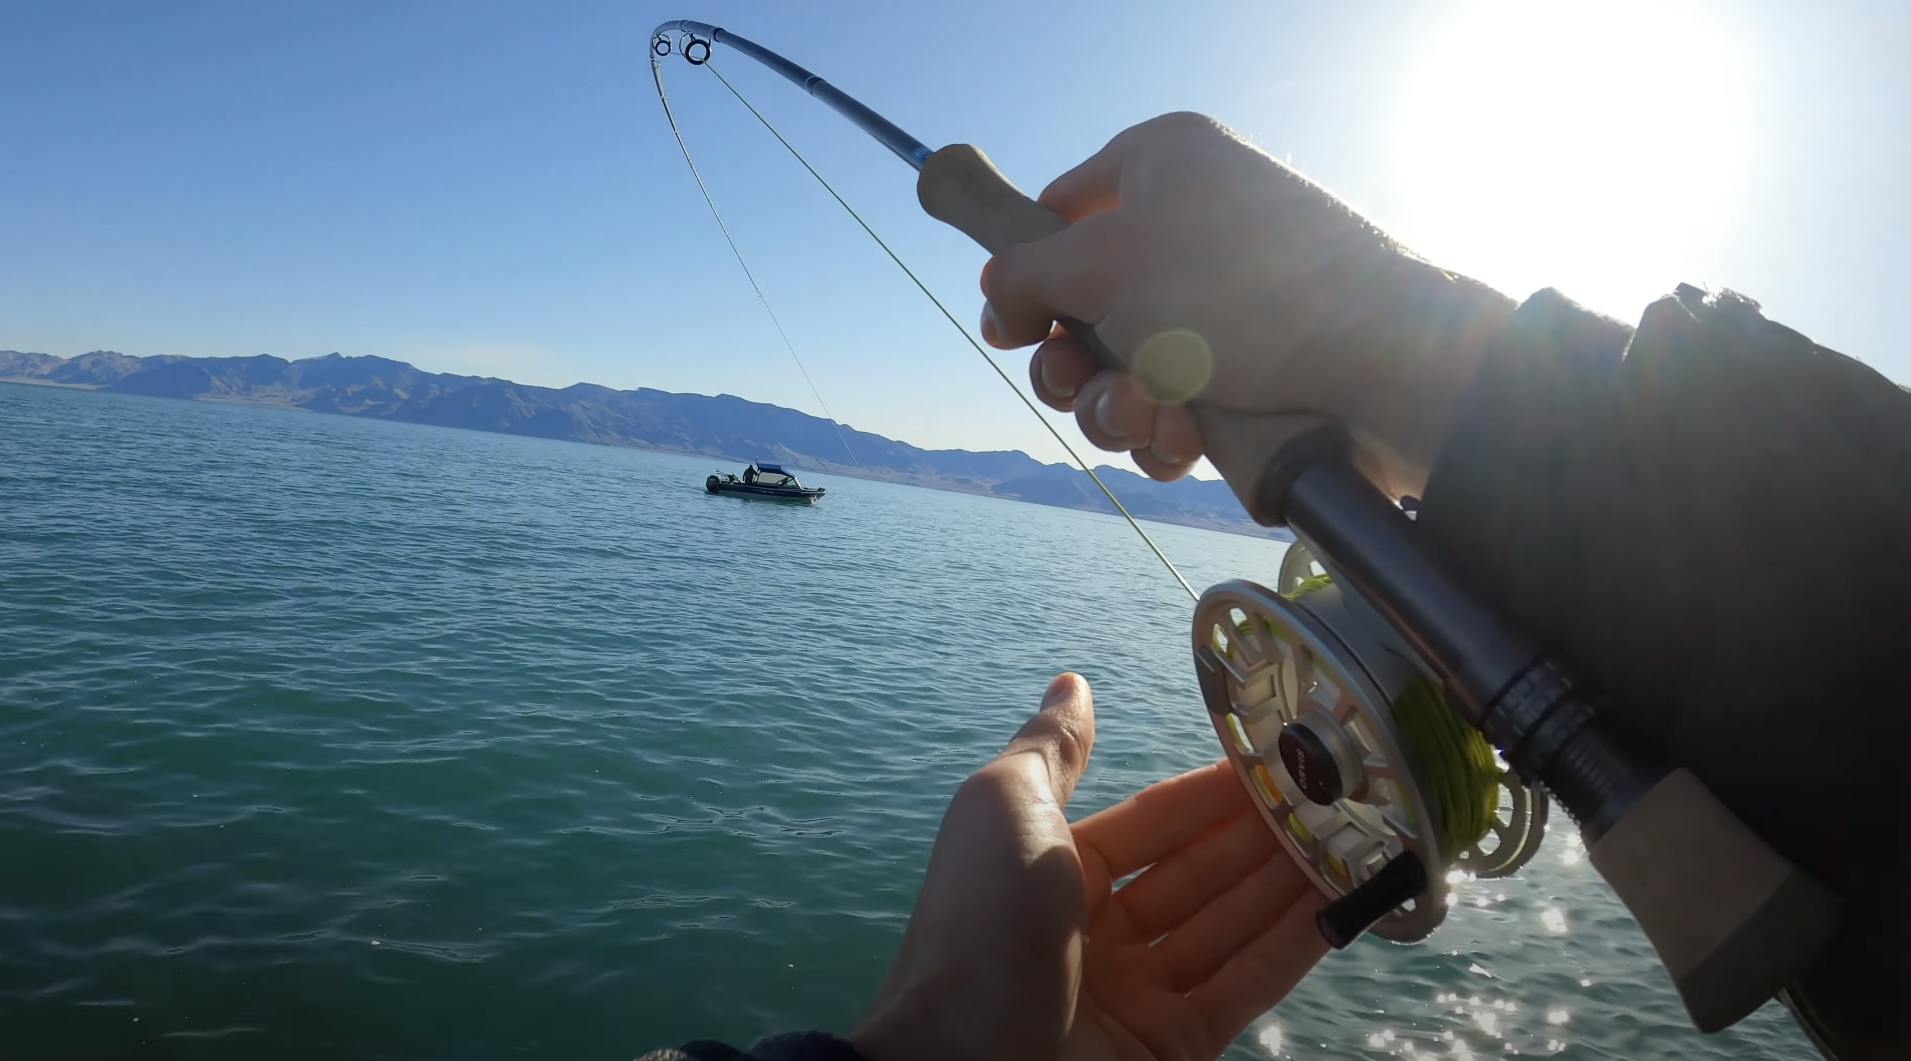 A fisherman using the Orvis Hydros Fly Reel to fish on a body of water.